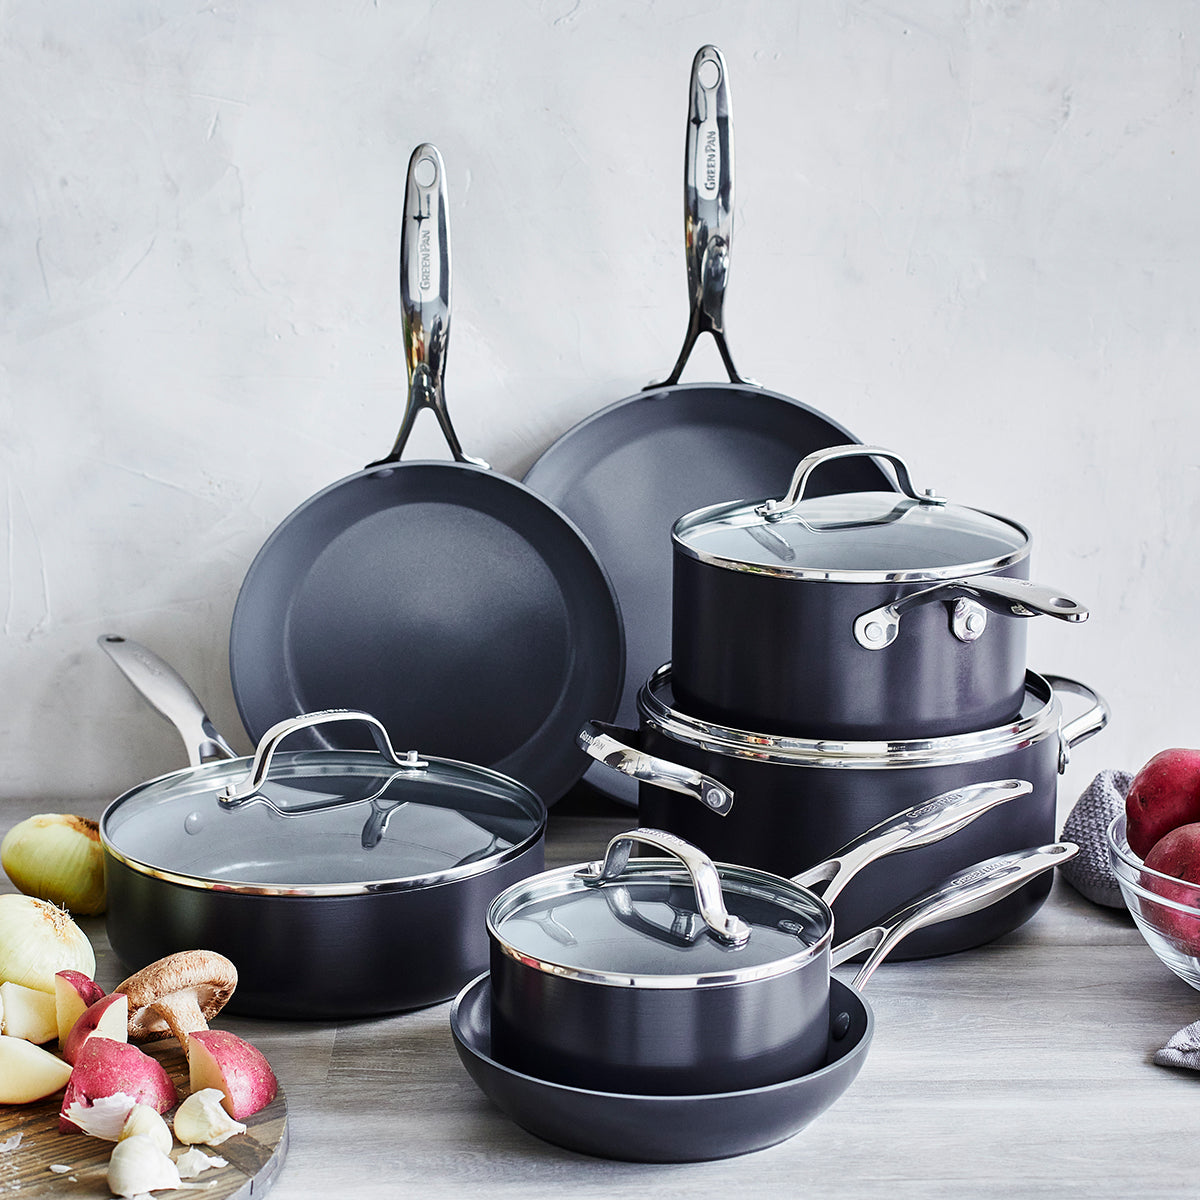 8 Piece Luxe Cookware Set, Non-Stick Ceramic Coating, Oven & Dishwasher  Safe